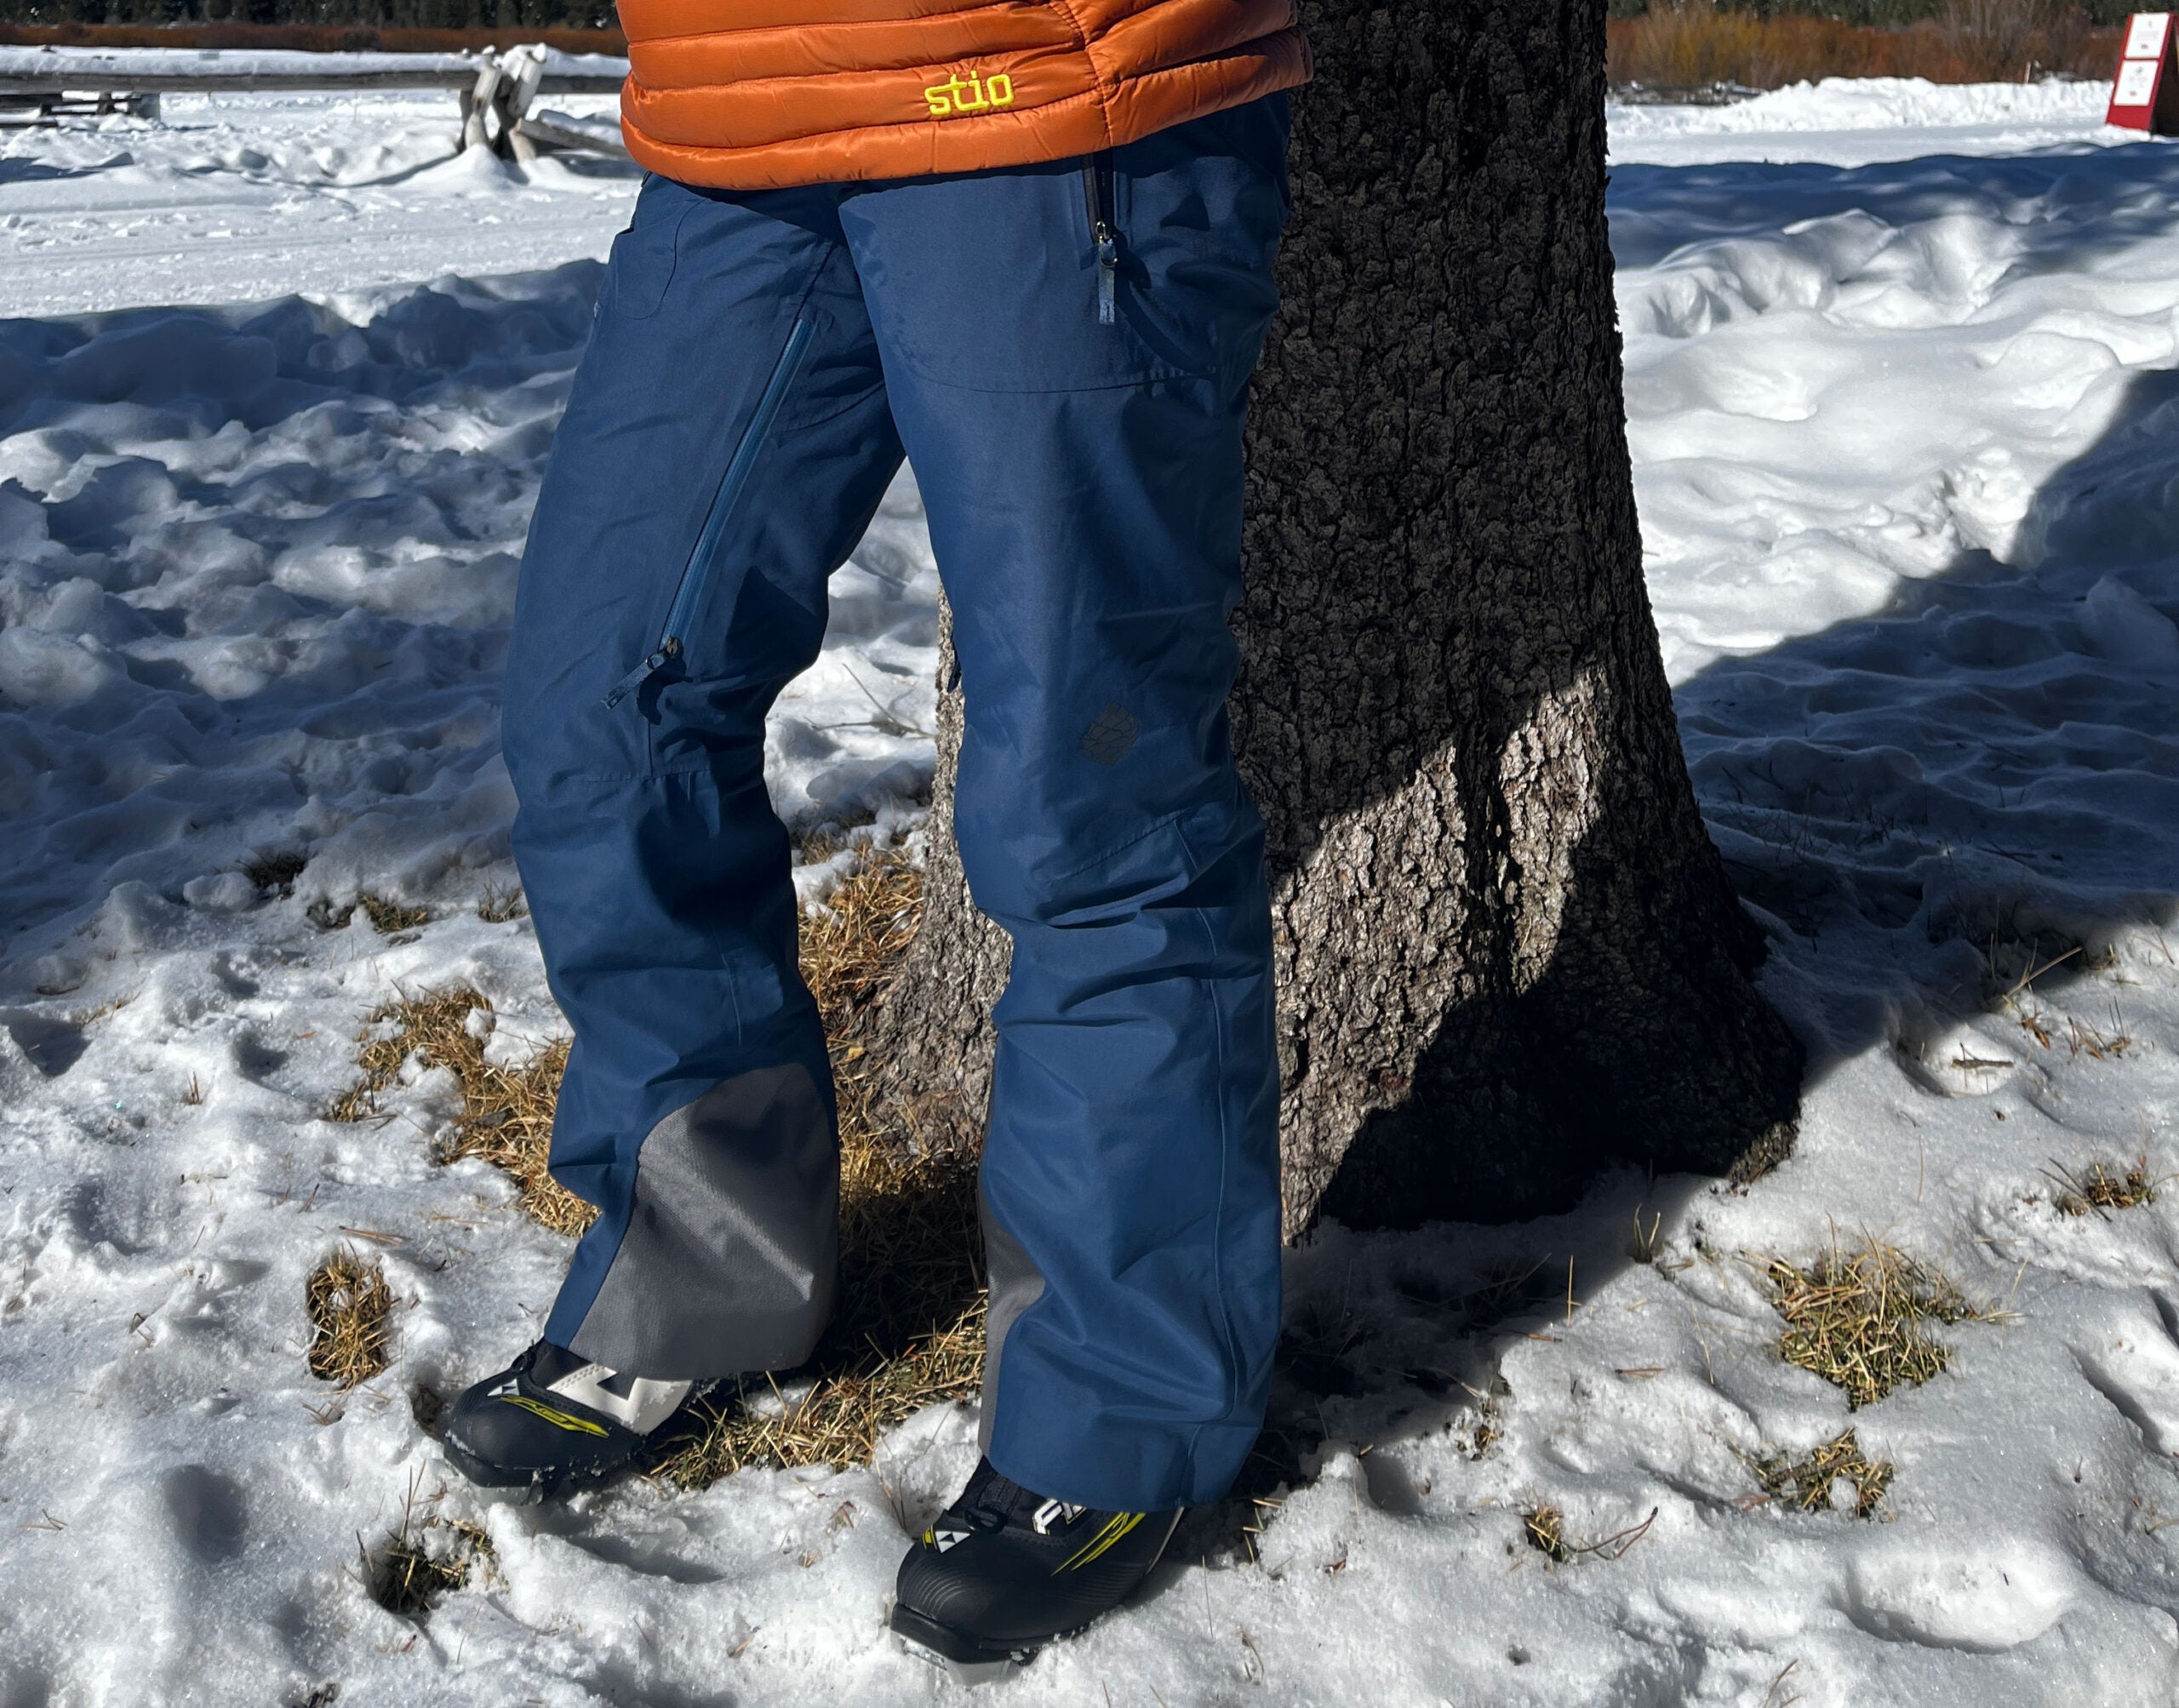 A person wearing Stio women's snow pants in front of a tree with snow on the ground